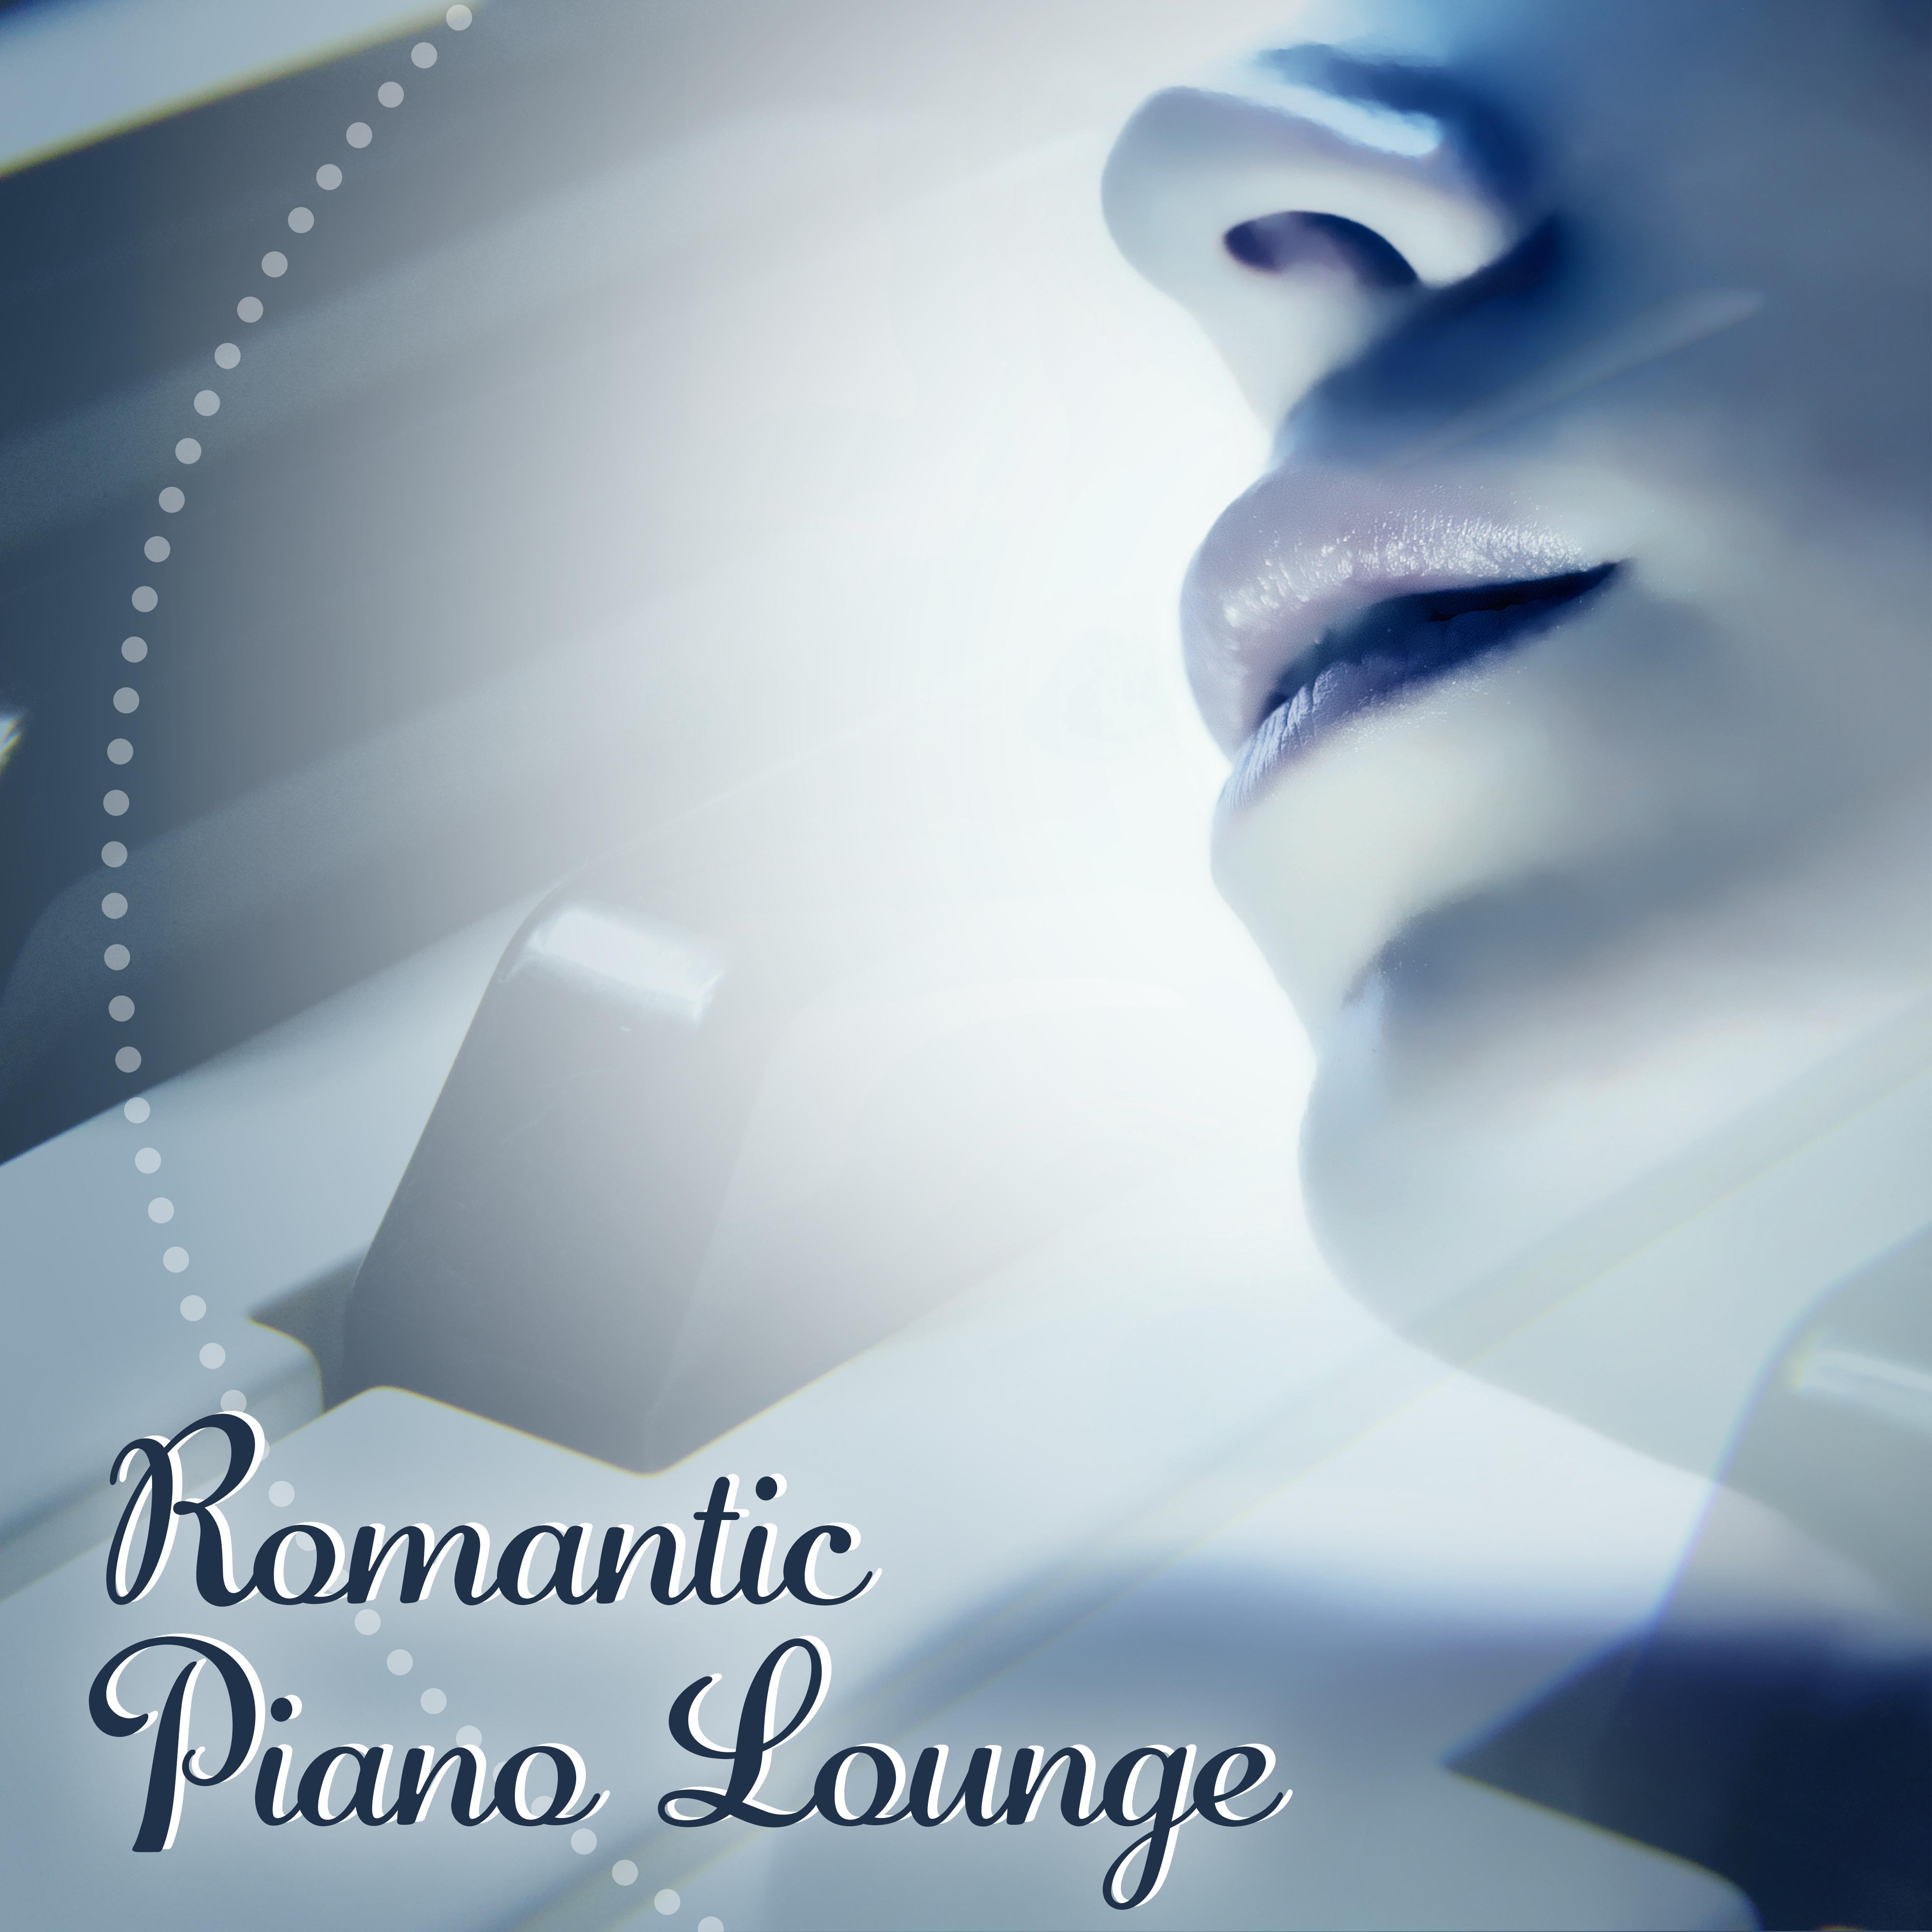 Romantic Piano Lounge – Sensual Music, Instrumental Sounds, Romantic Jazz for Dinner, Relaxed Jazz